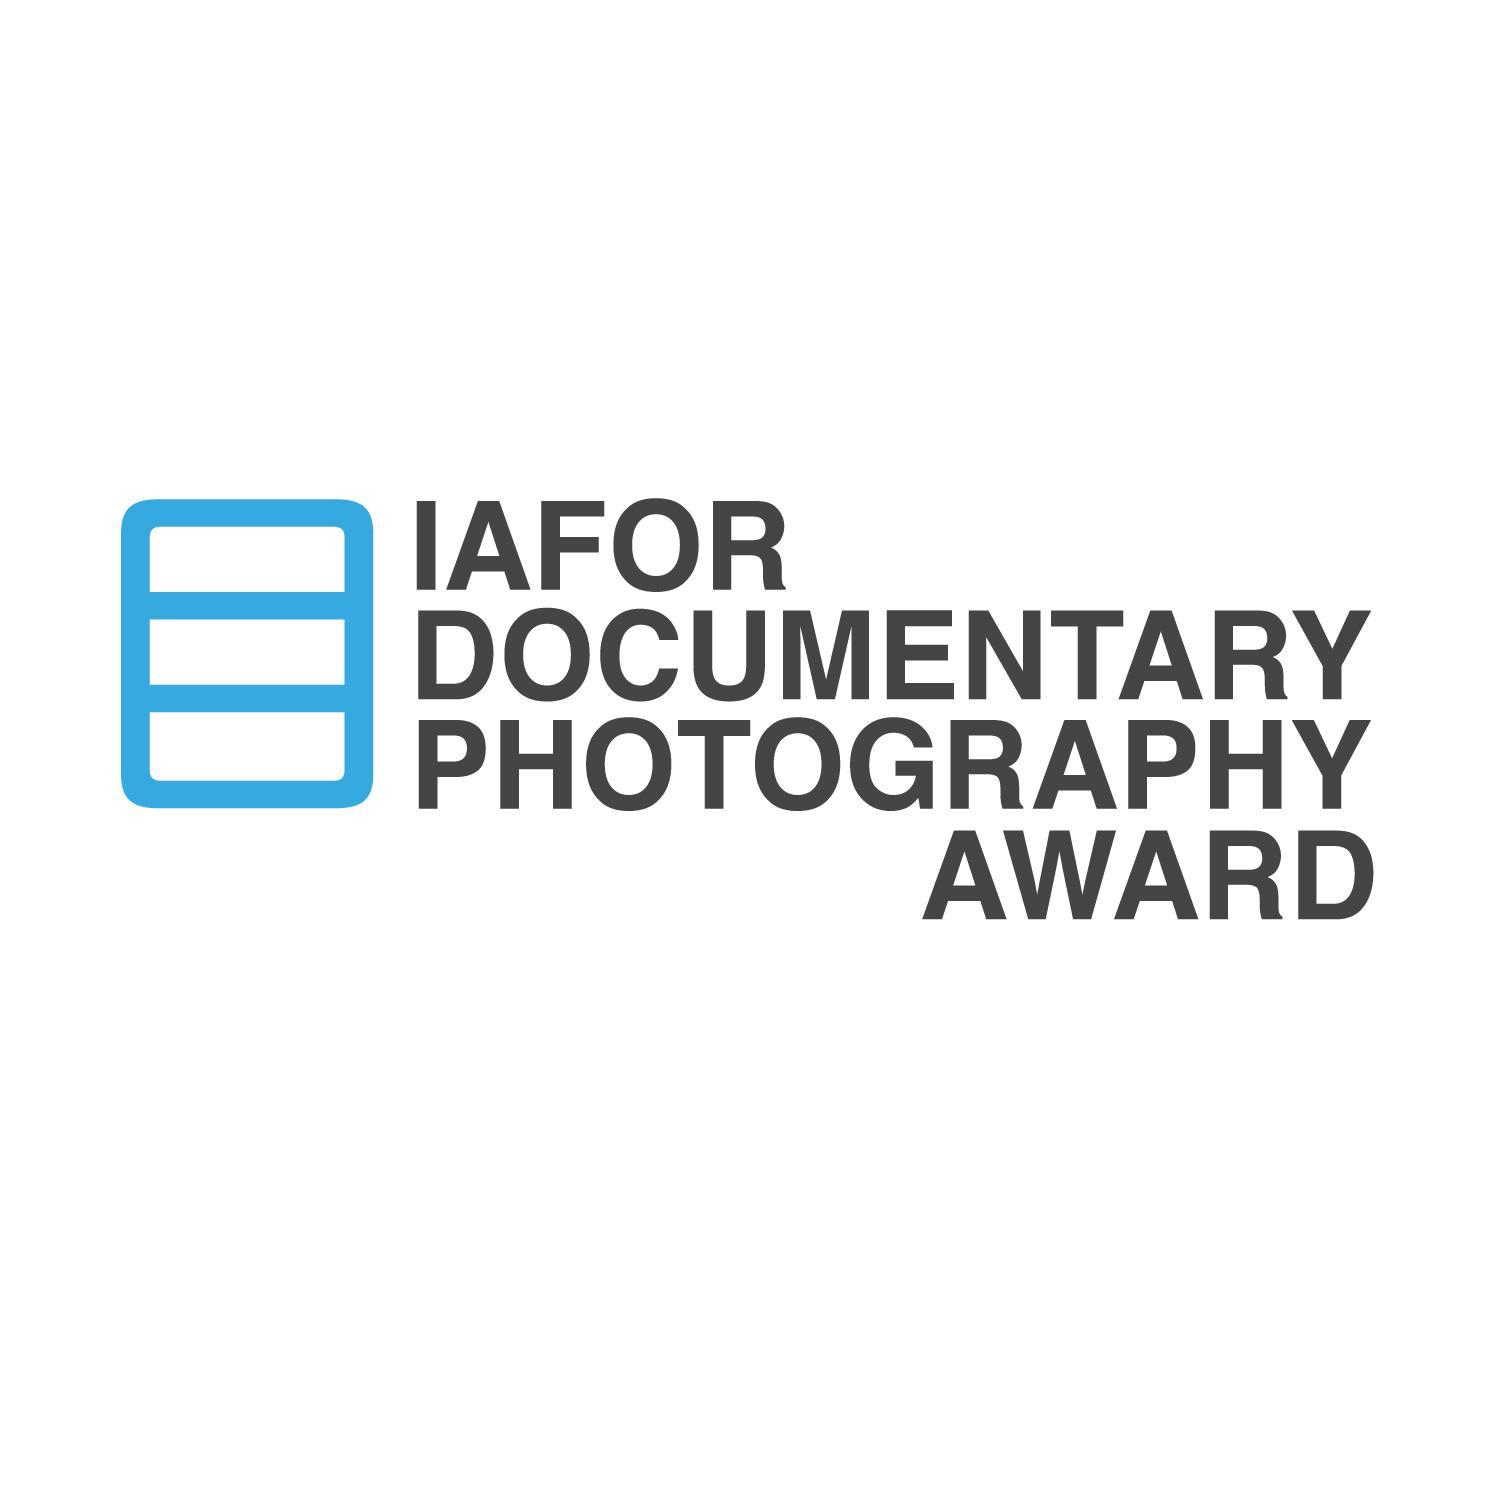 The IAFOR Documentary Photography Award seeks to assist and promote the professional development of emerging documentary photographers and photojournalists.